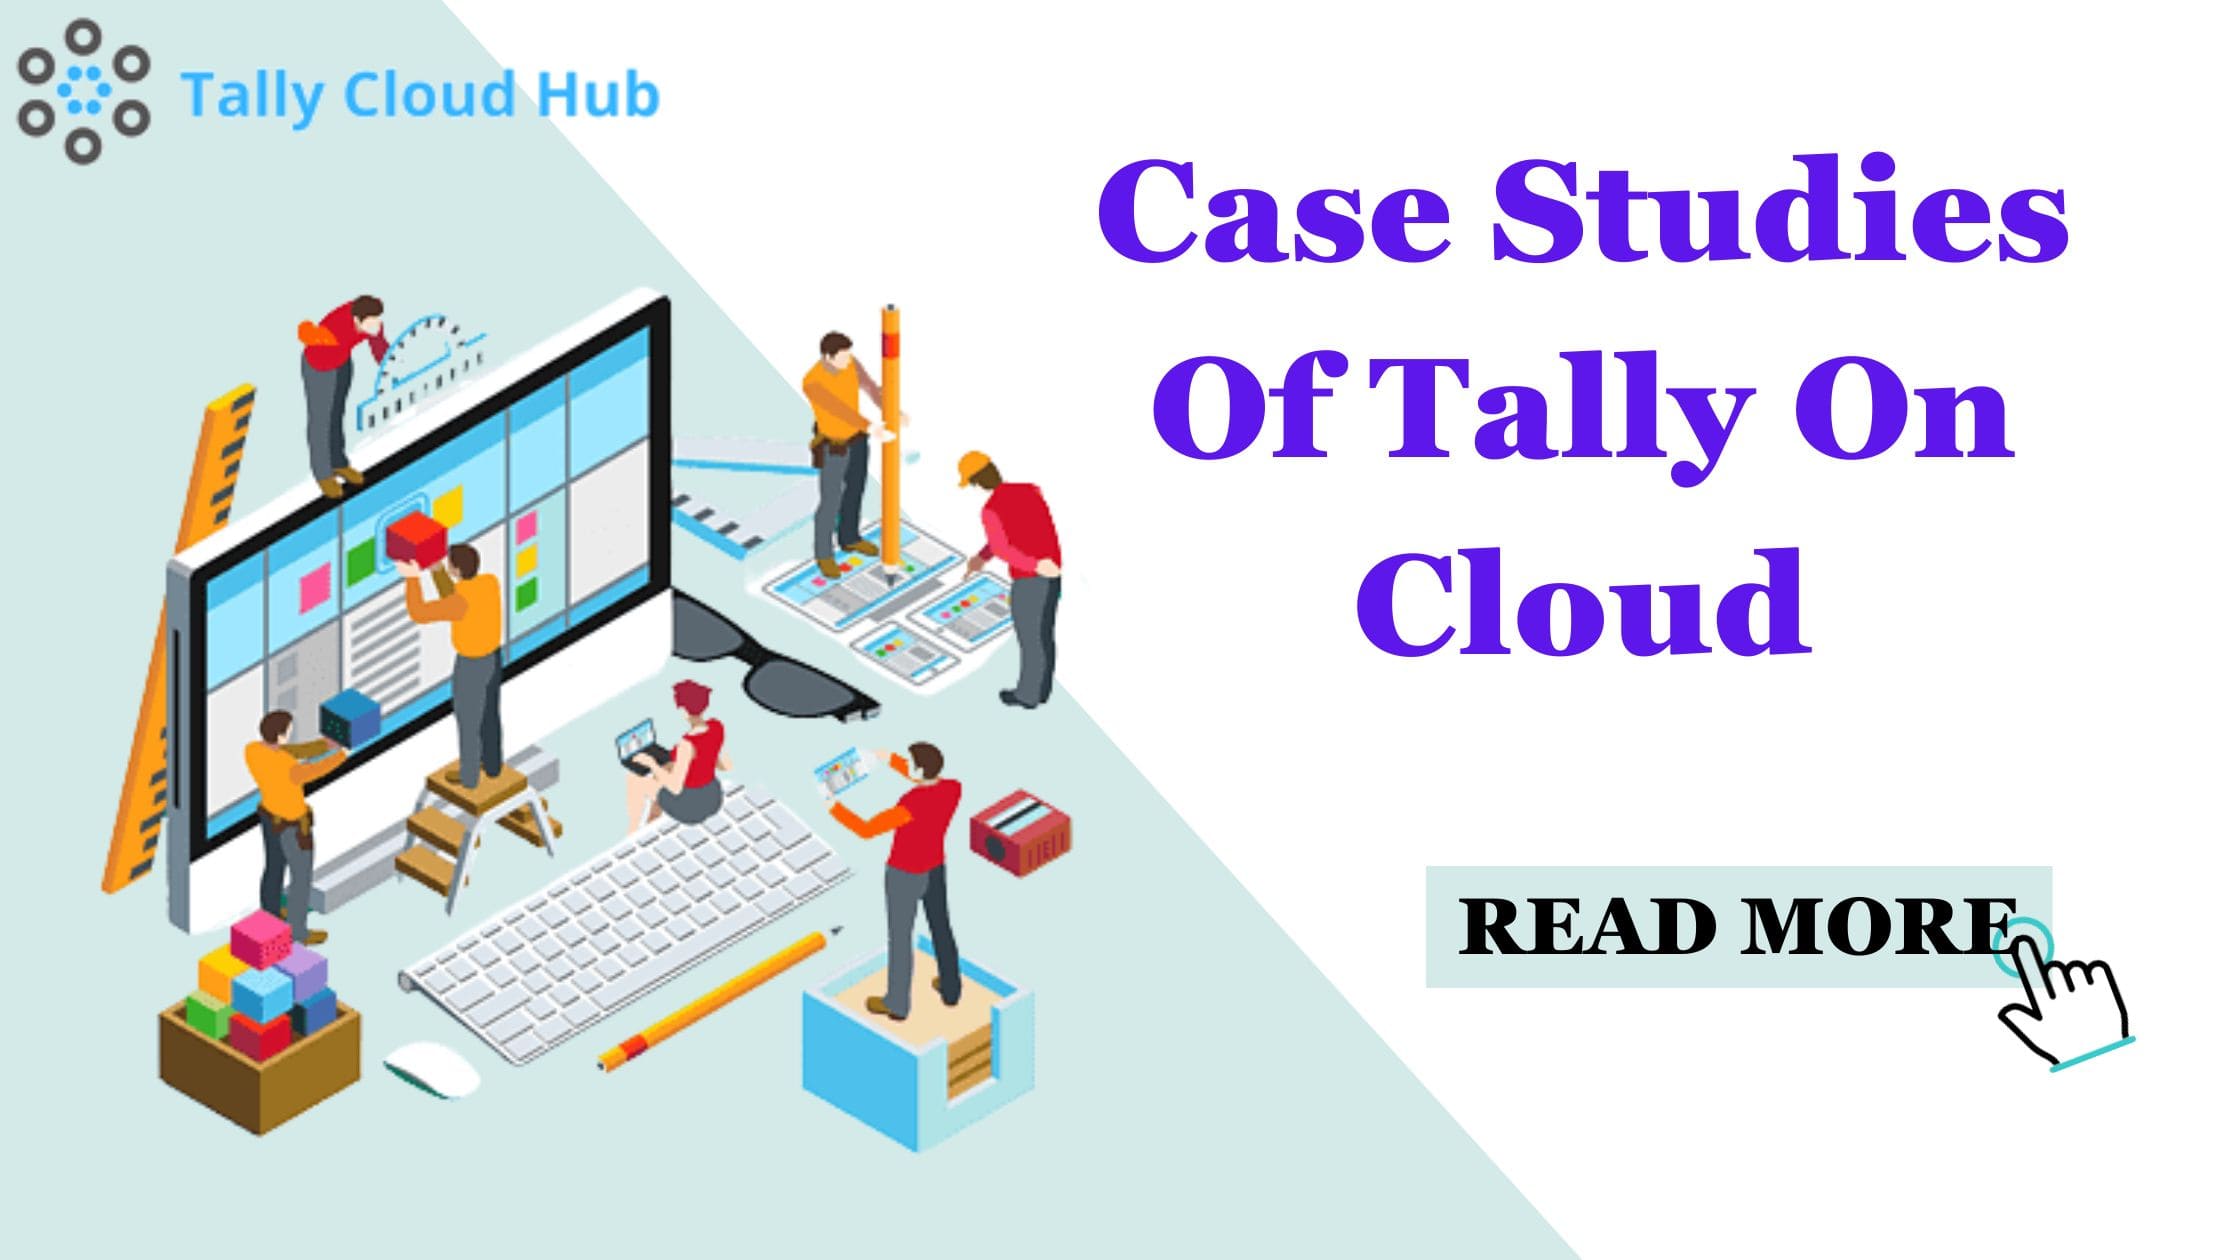 Tally on Cloud allows businesses to scale their operations seamlessly.